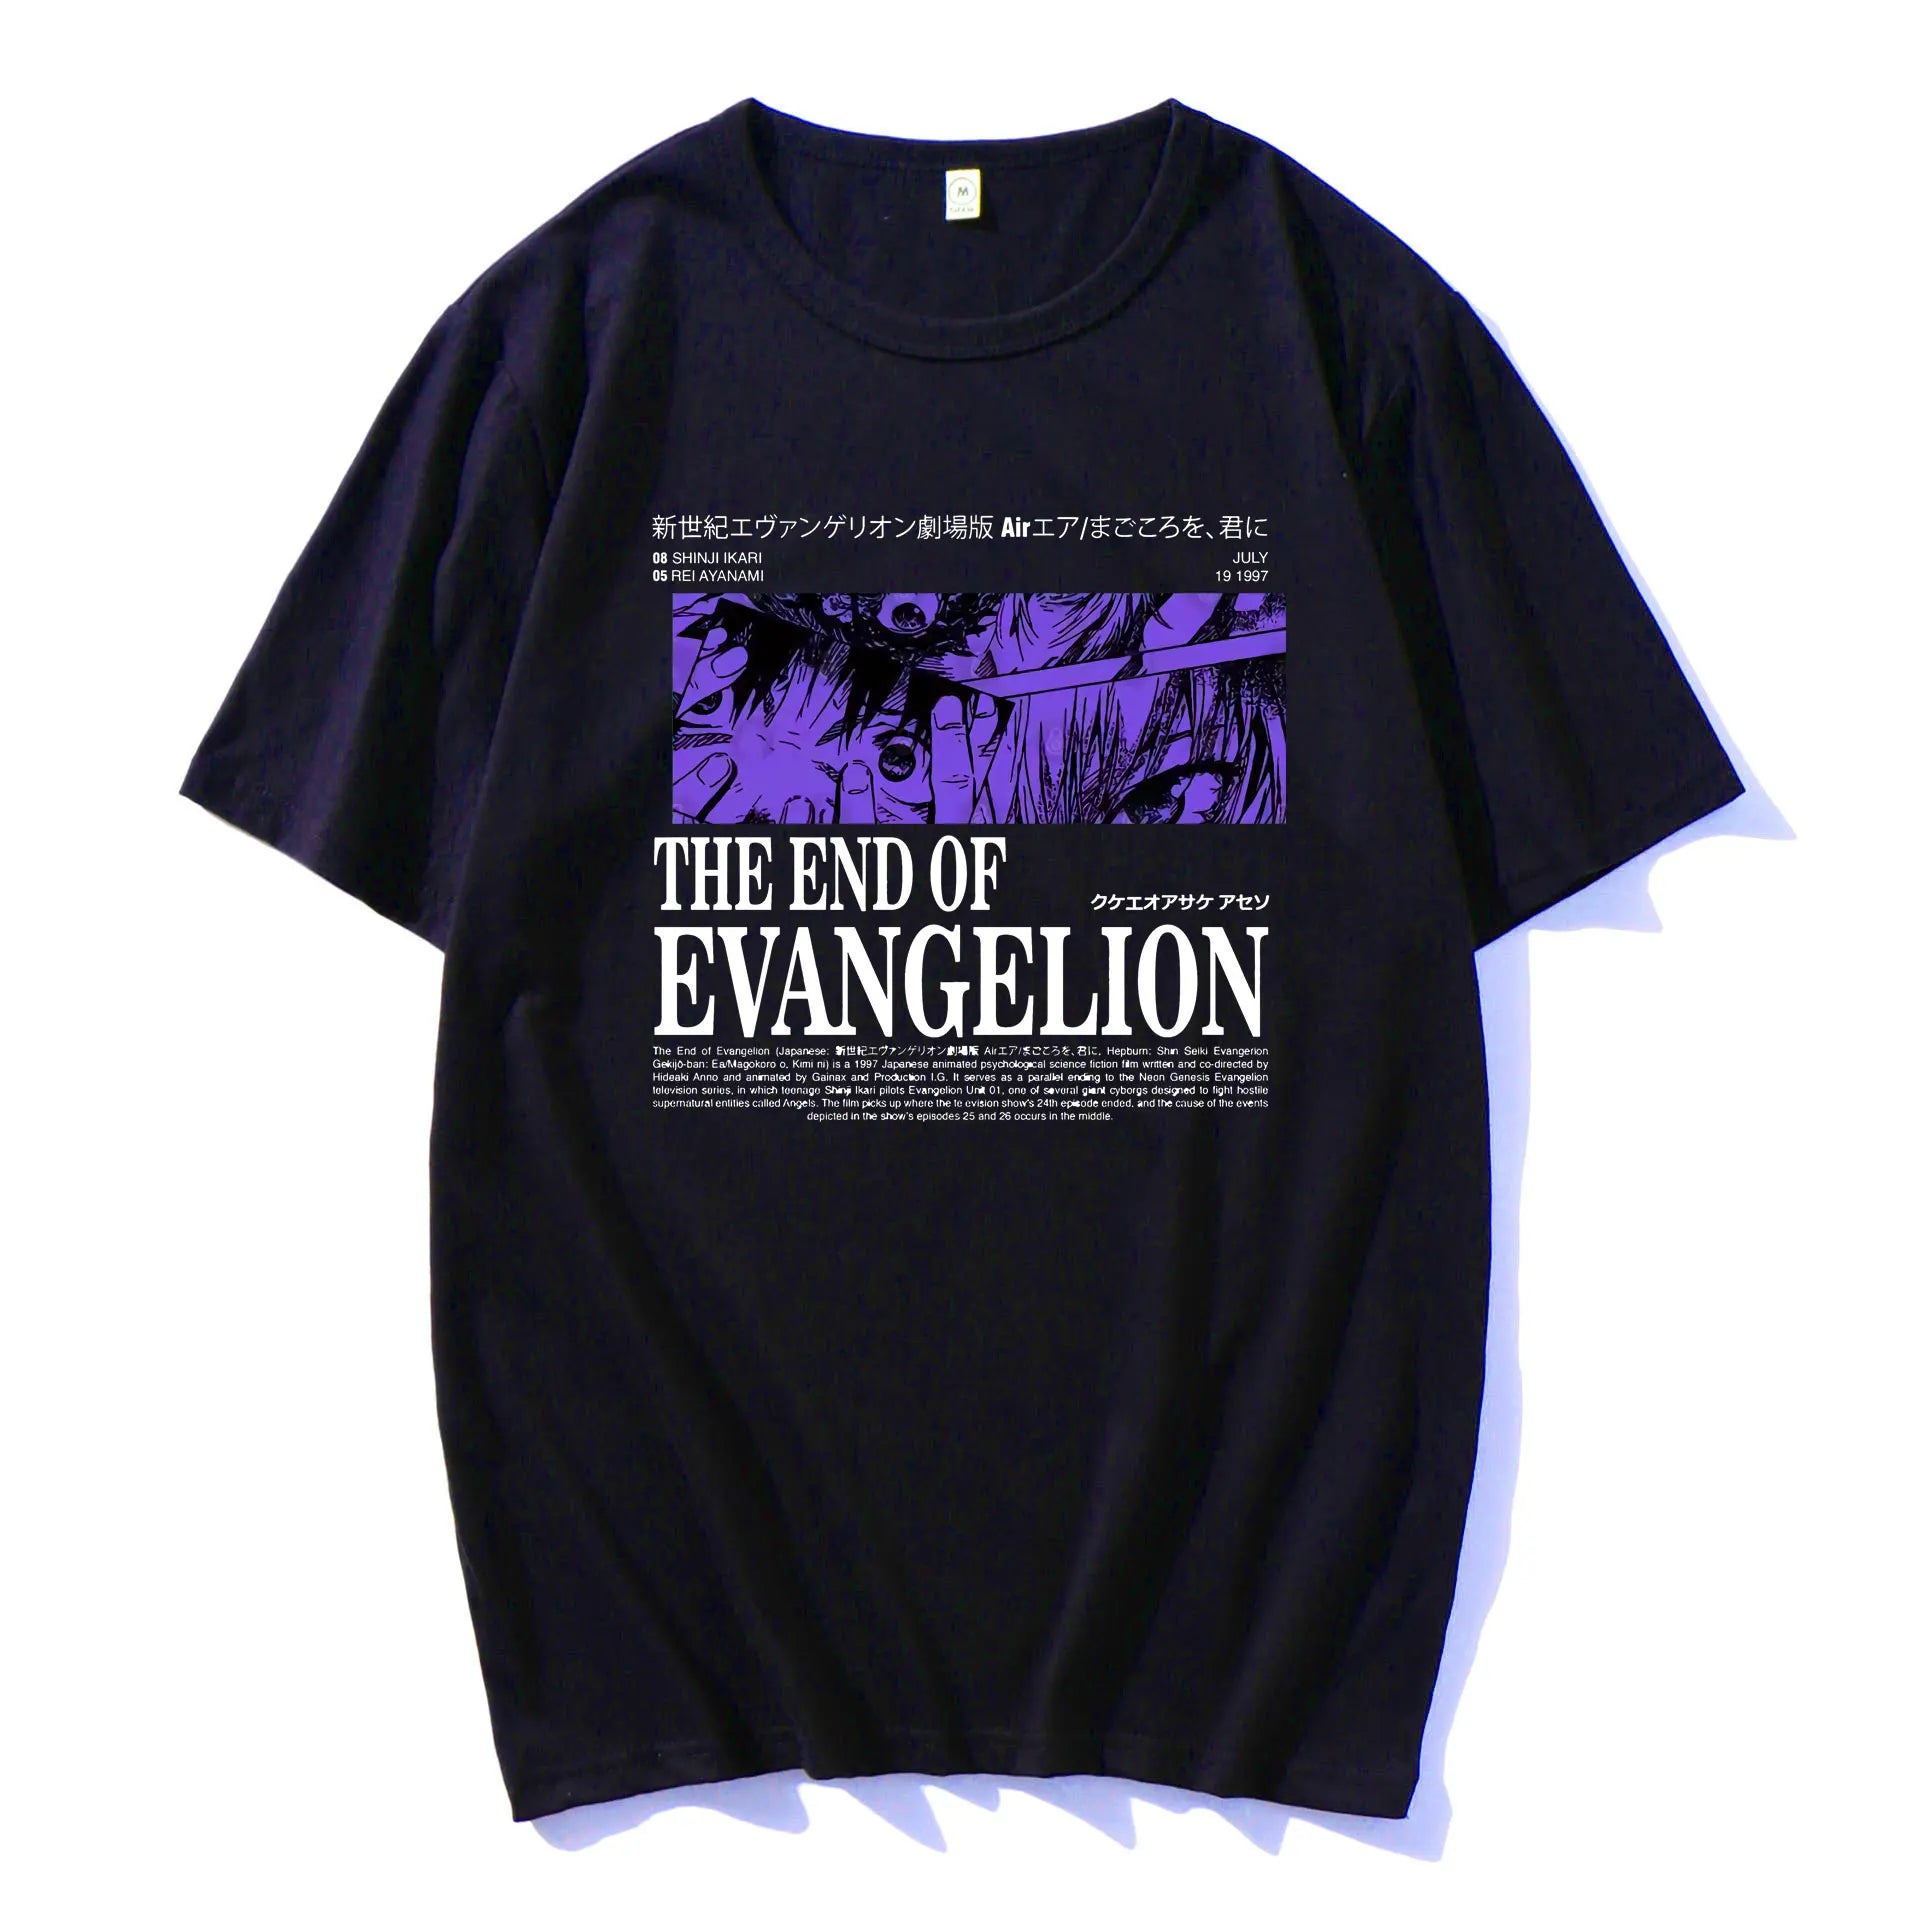 The End of Evangelion Tshirt Navy blue